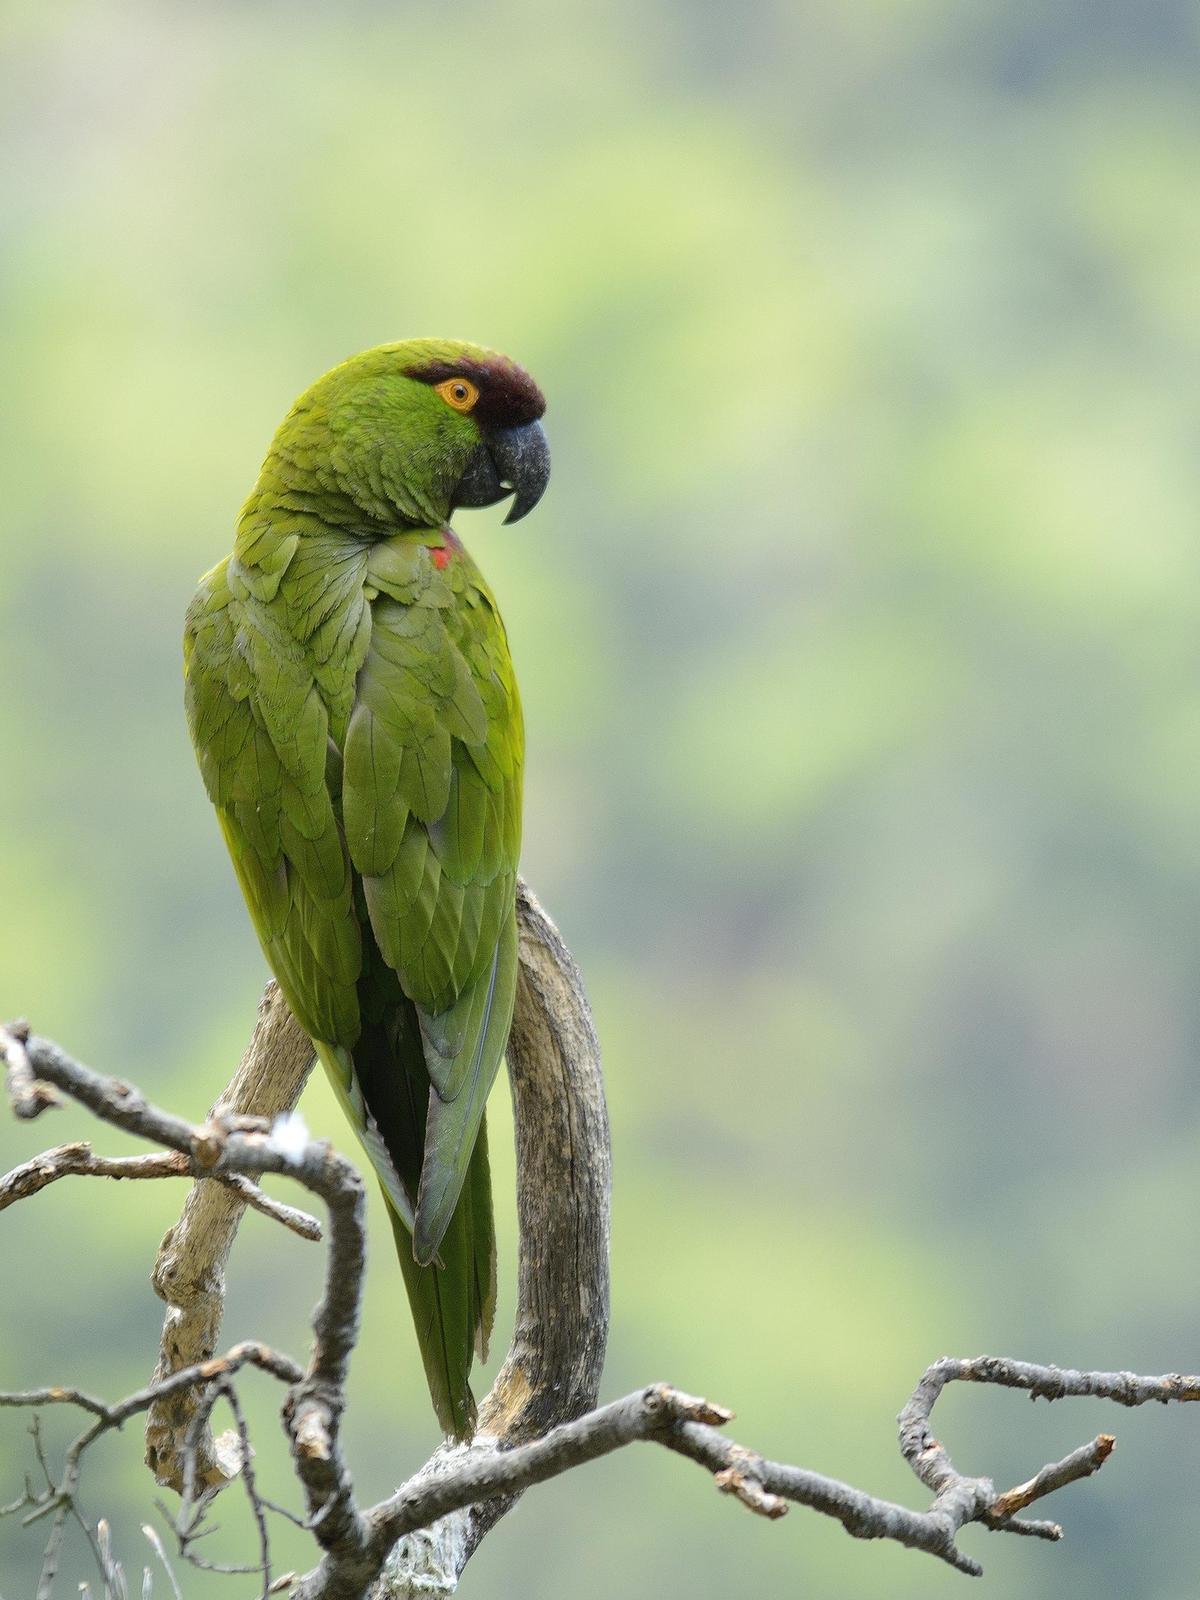 Maroon-fronted Parrot Photo by Andres Rios